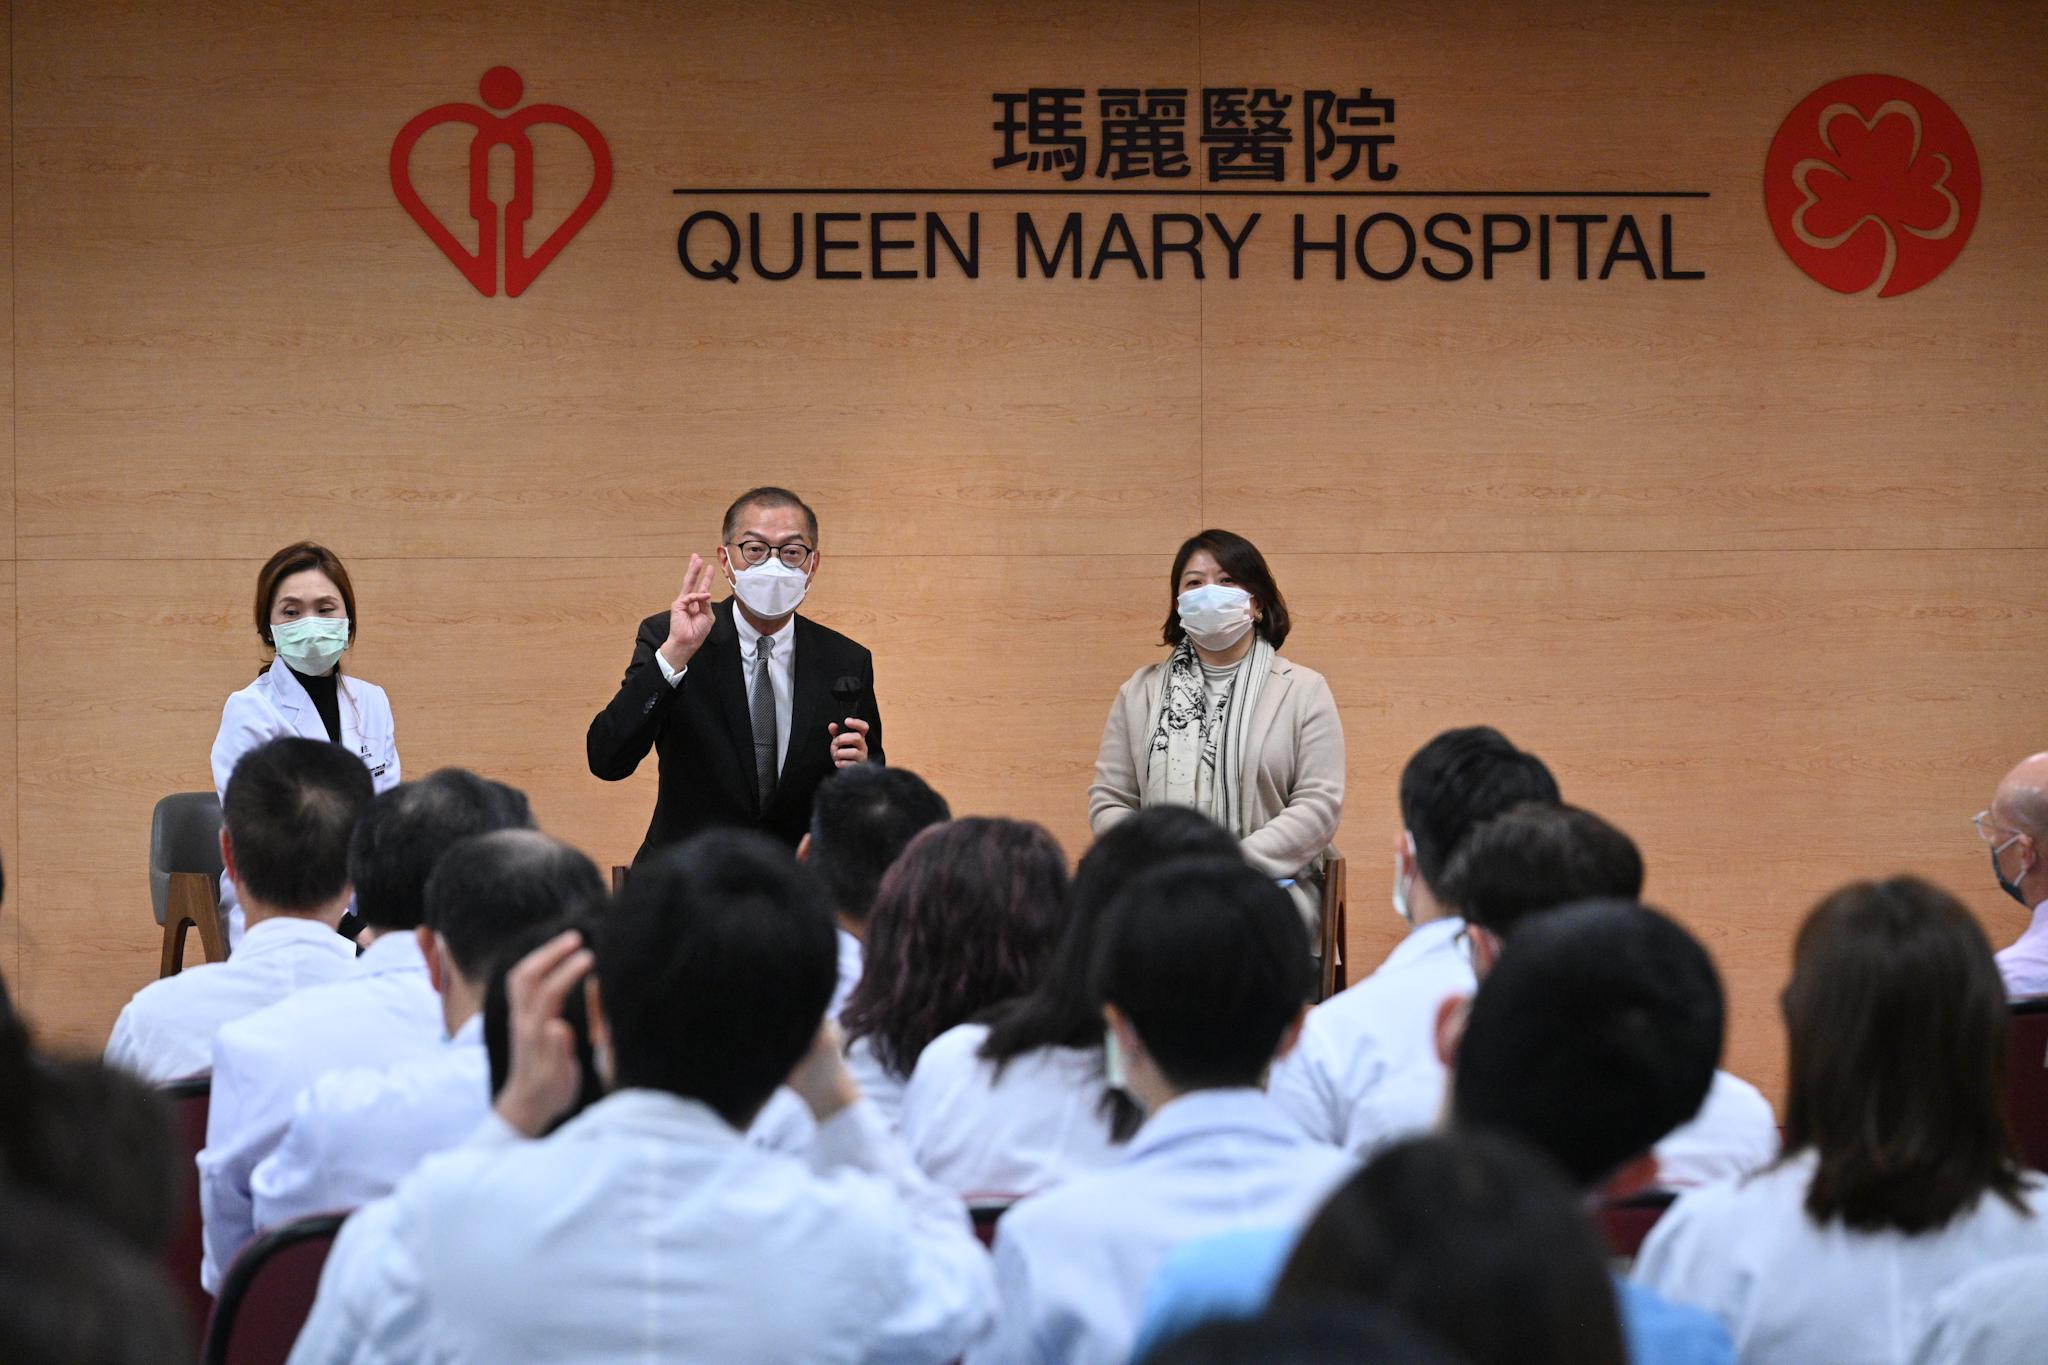 The Secretary for Health, Professor Lo Chung-mau, visited Queen Mary Hospital today (January 13). Photo shows Professor Lo (centre) and the Under Secretary for Health, Dr Libby Lee (right), exchanging views with the frontline healthcare staff. 
